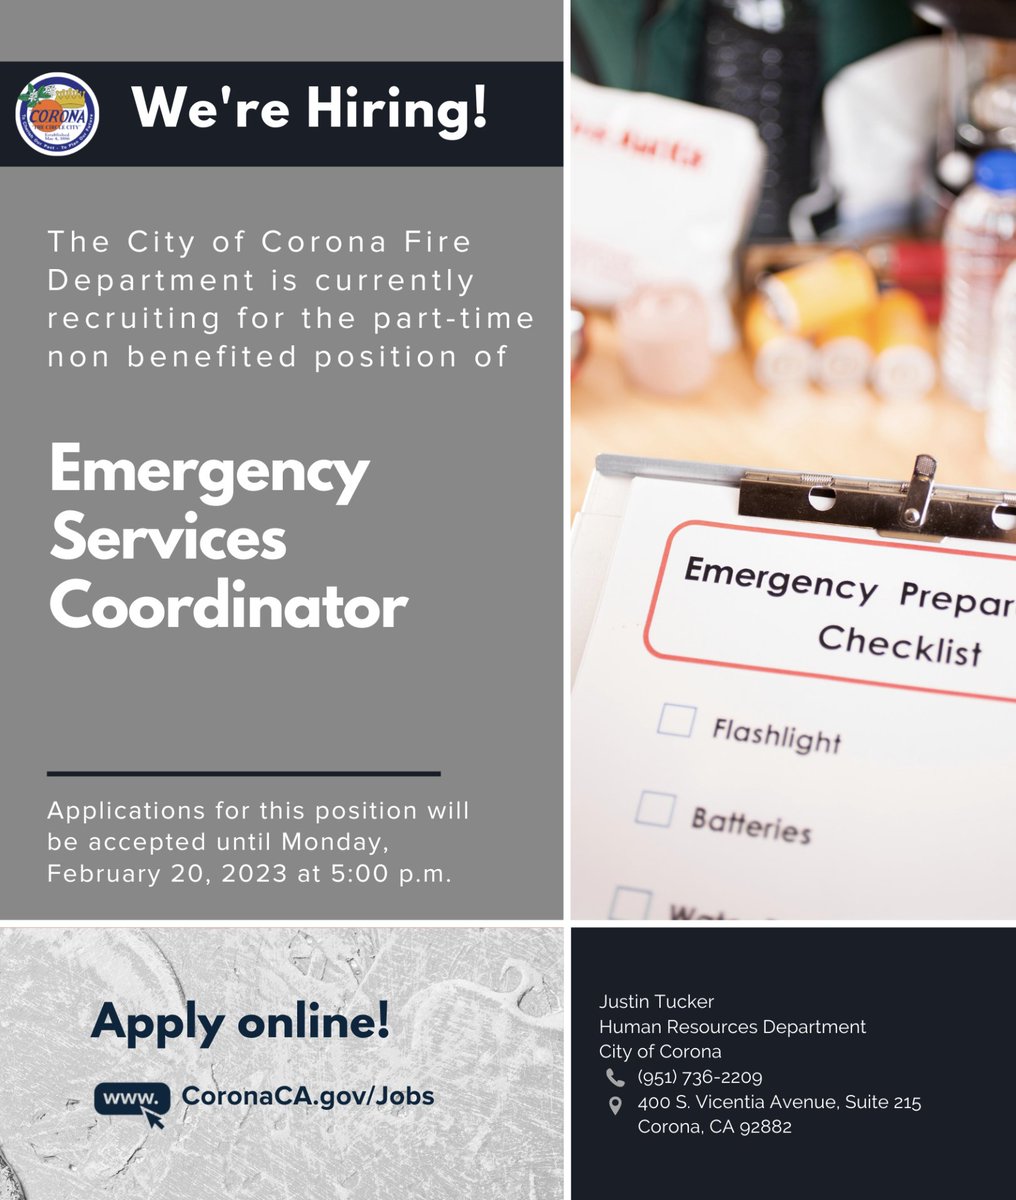 Our Fire Department is hiring an Emergency Services Coordinator. View details and apply online: https://t.co/FfaJ5M2TQo https://t.co/6KHJVdTNXs